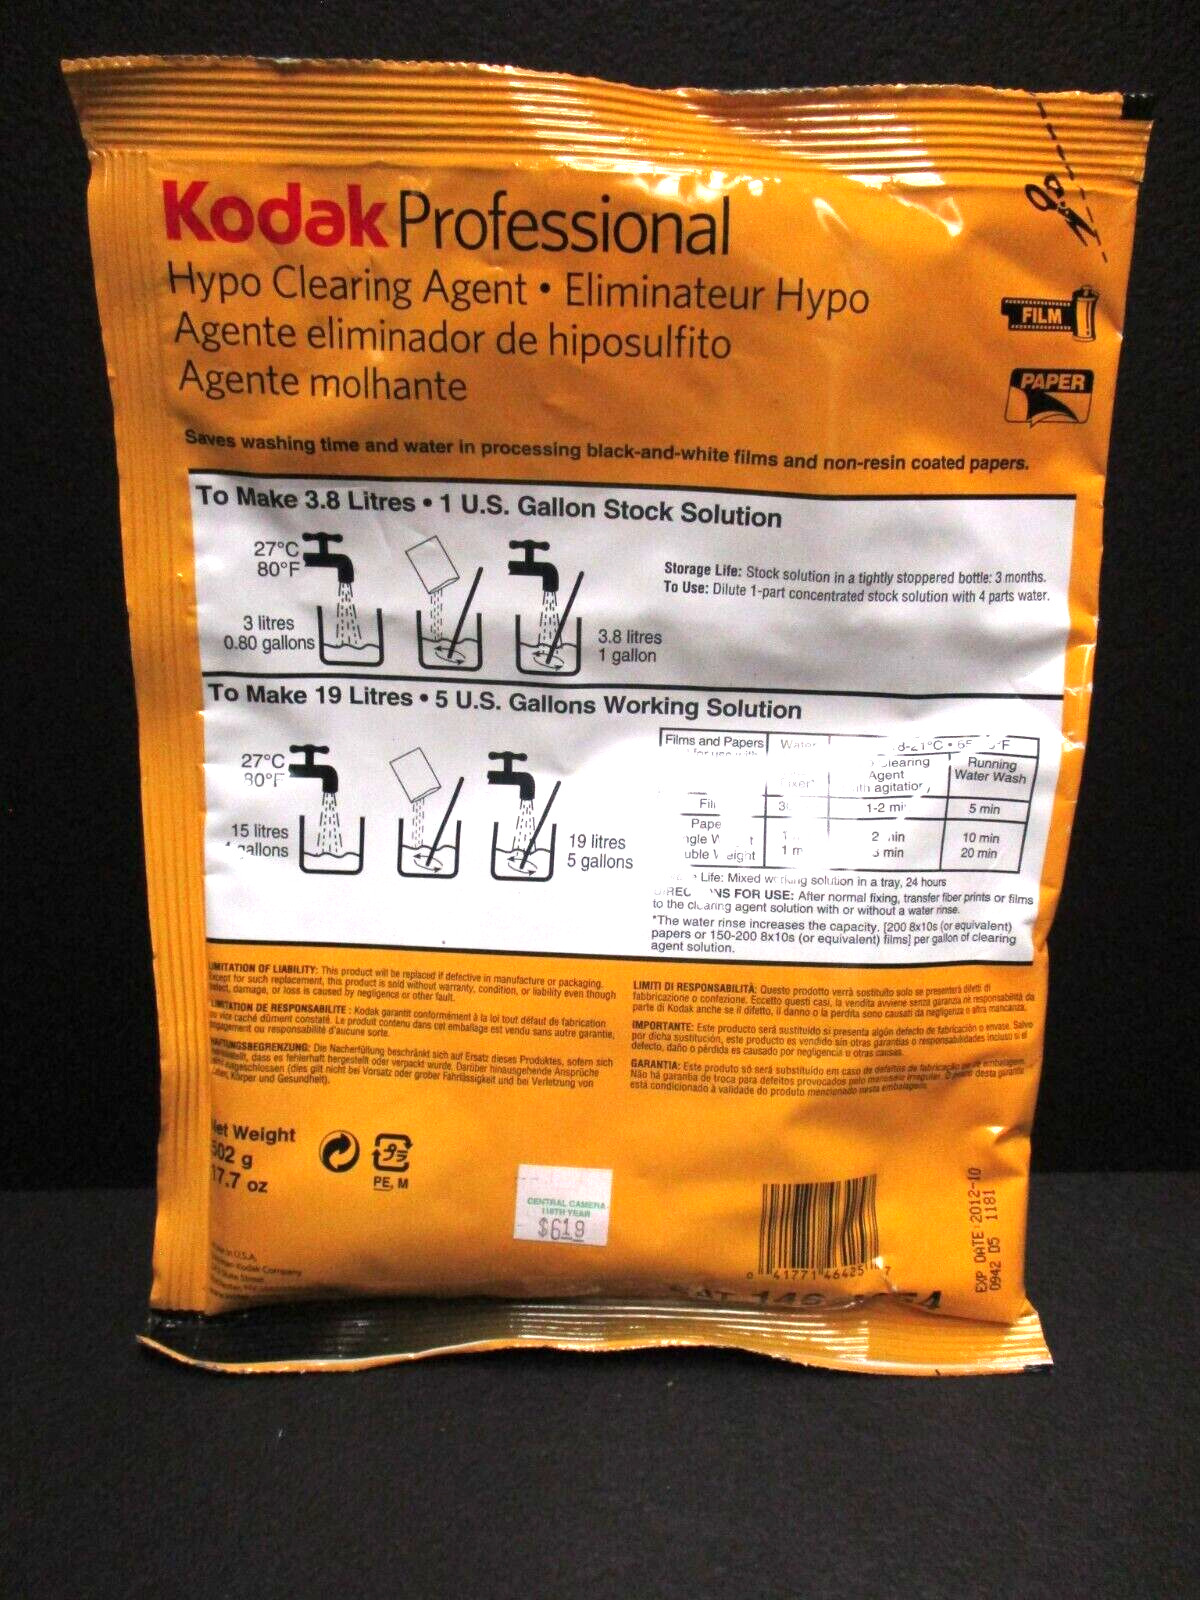 Kodak Hypo Clearing Agent 1 Gal. Stock Solution (5 Gal. Work Solution) 2 Pkgs